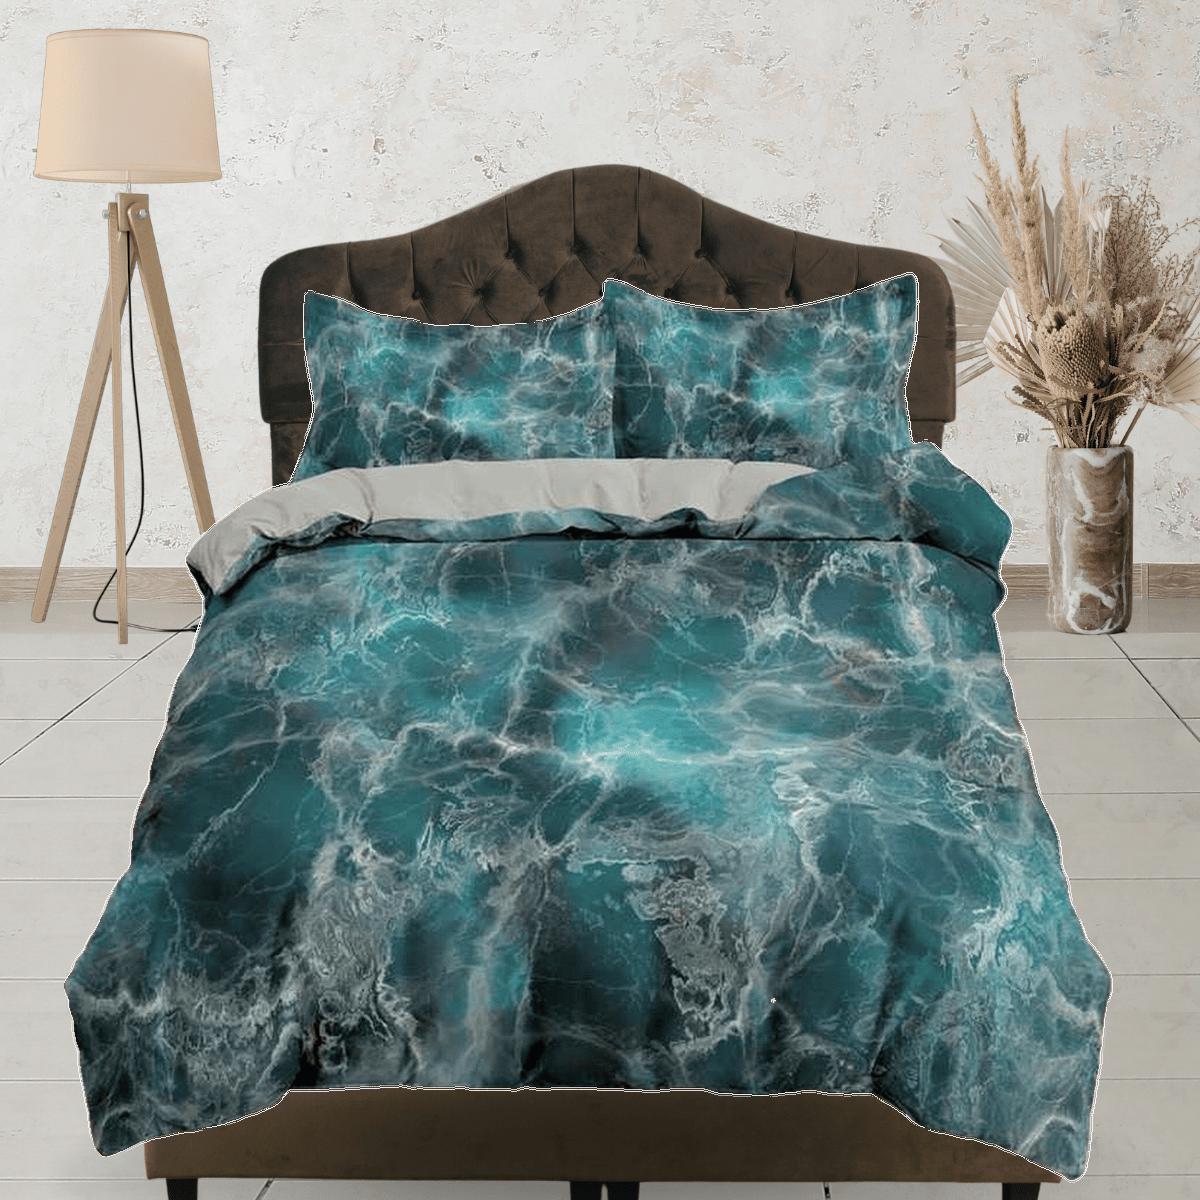 daintyduvet Contemporary bedroom set teal green aesthetic duvet cover, alcohol ink abstract art room decor boho chic bedding set full king queen